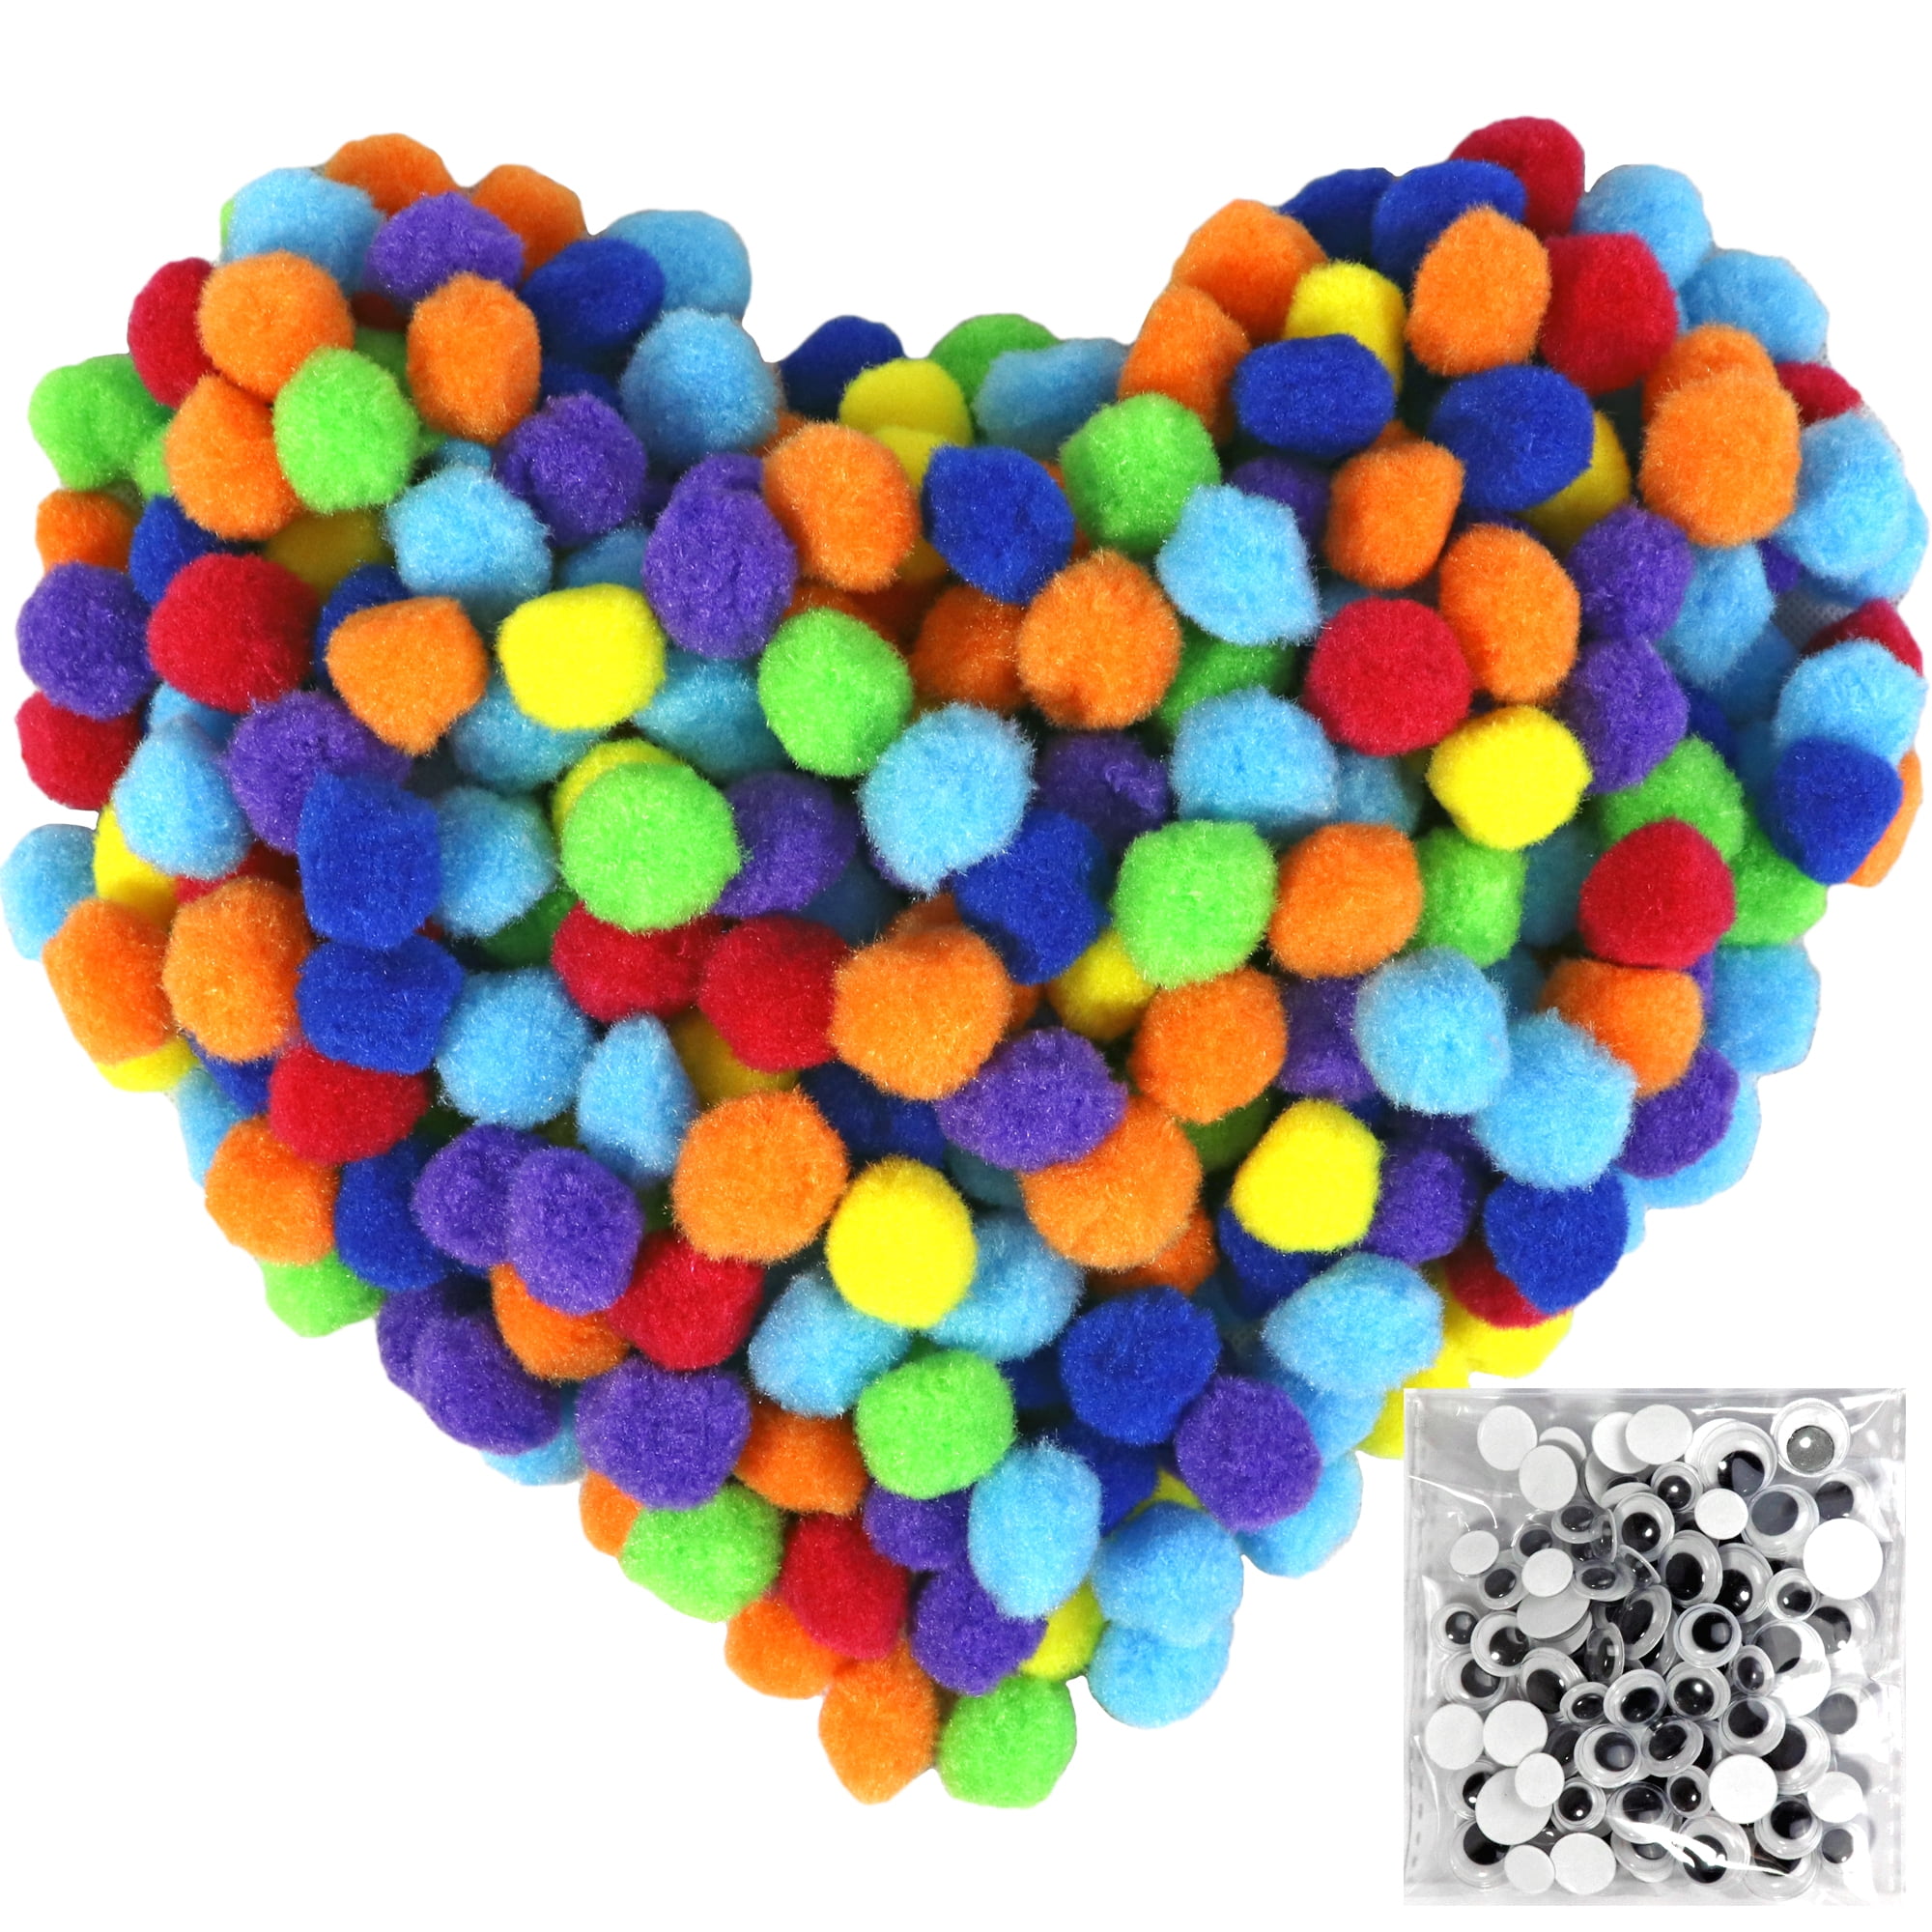 FREE GIFT OFFER Colourful Mixes 6mm 8mm 10mm 20mm Cardmaking Crafts POM POMS 